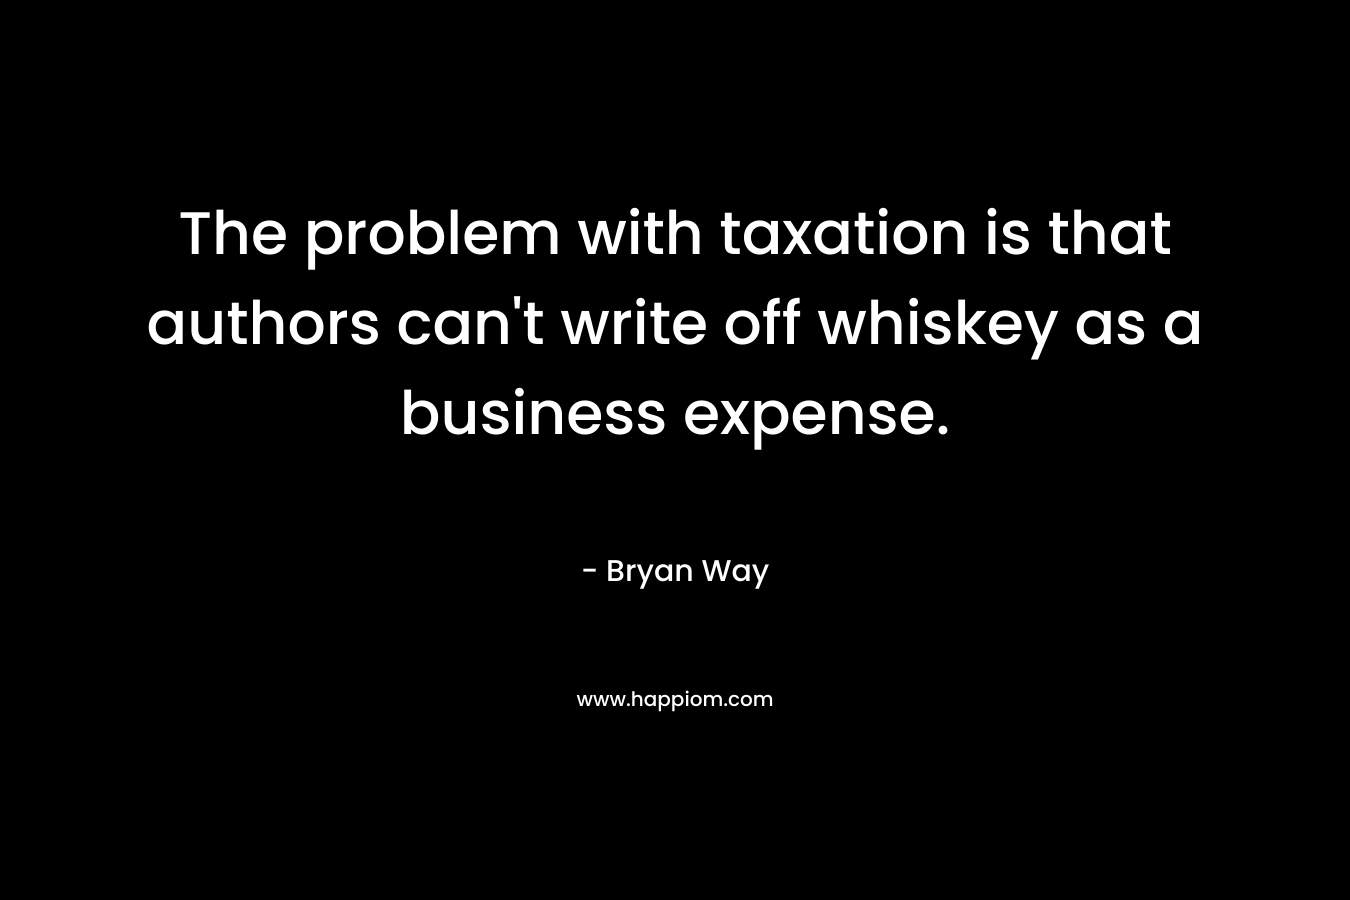 The problem with taxation is that authors can't write off whiskey as a business expense.